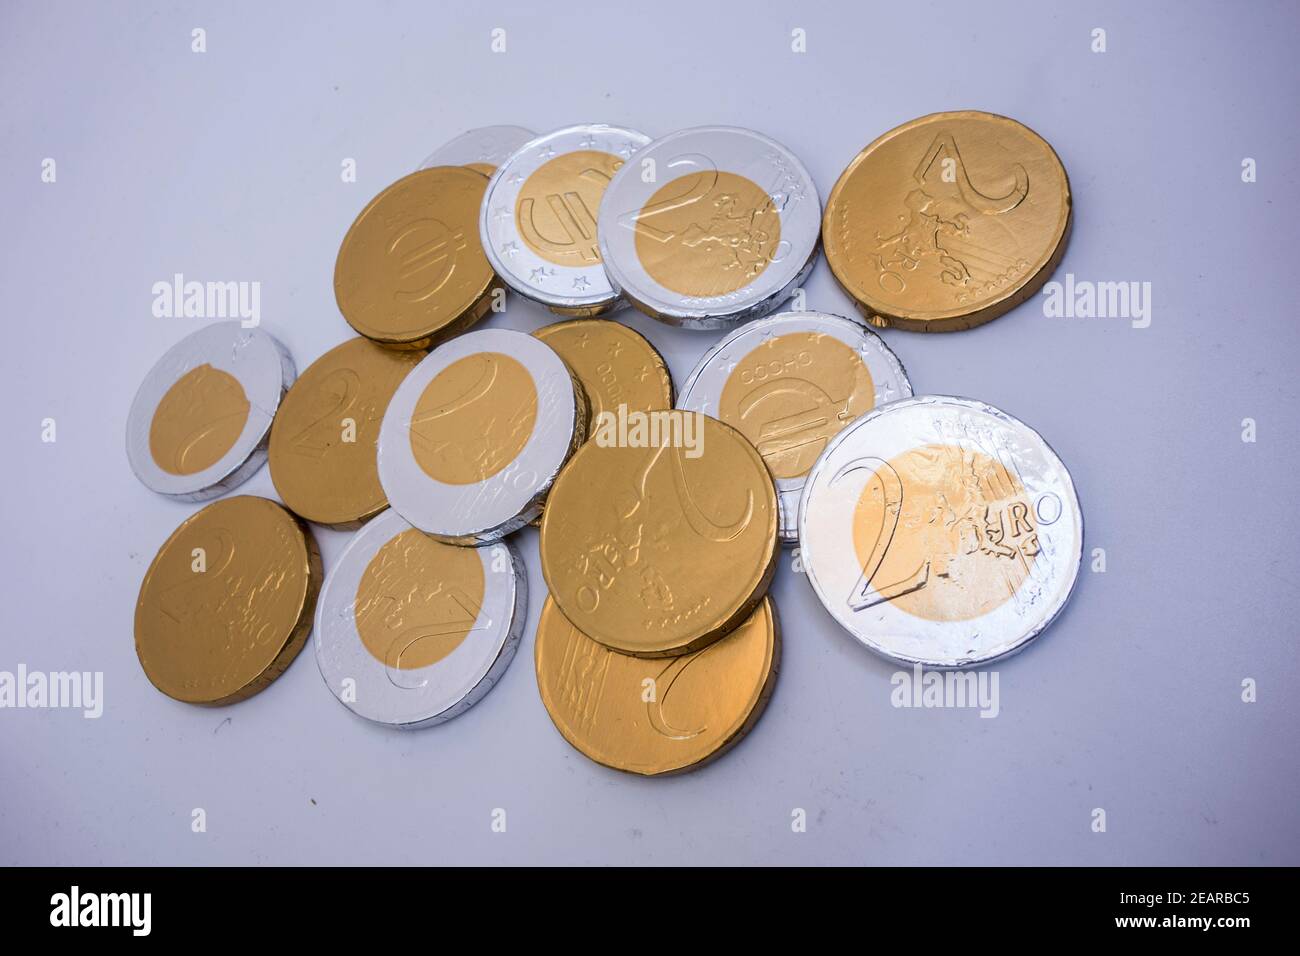 symbol for the currency Euro Stock Photo